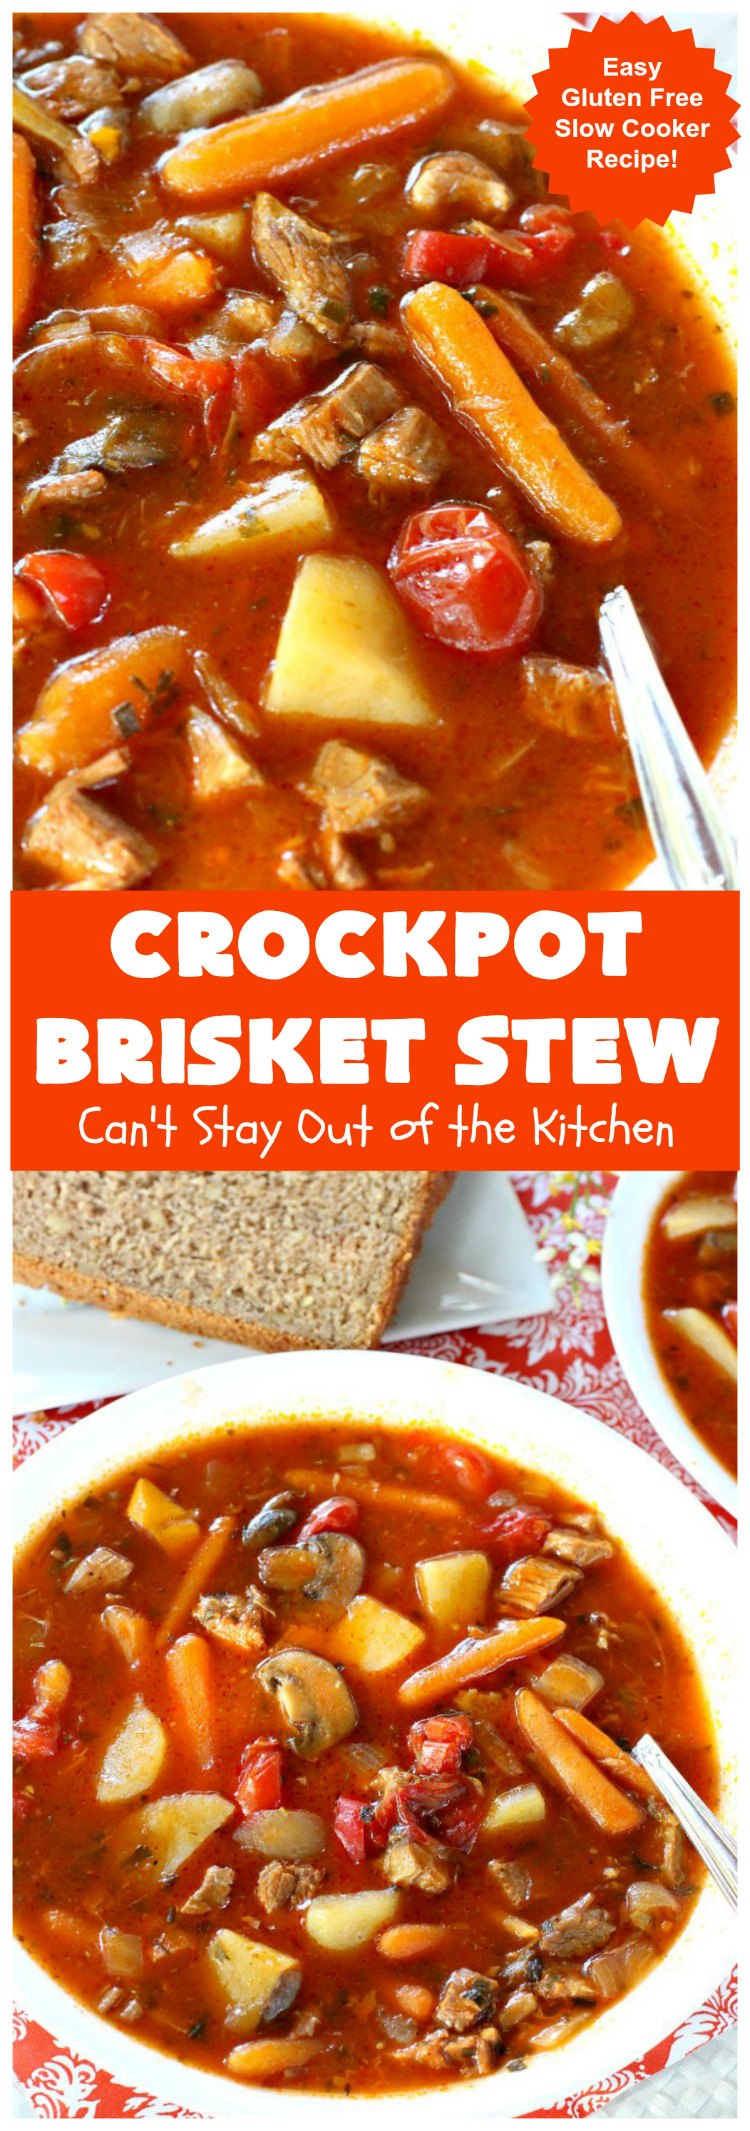 Crockpot Brisket Stew | Can't Stay Out of the Kitchen